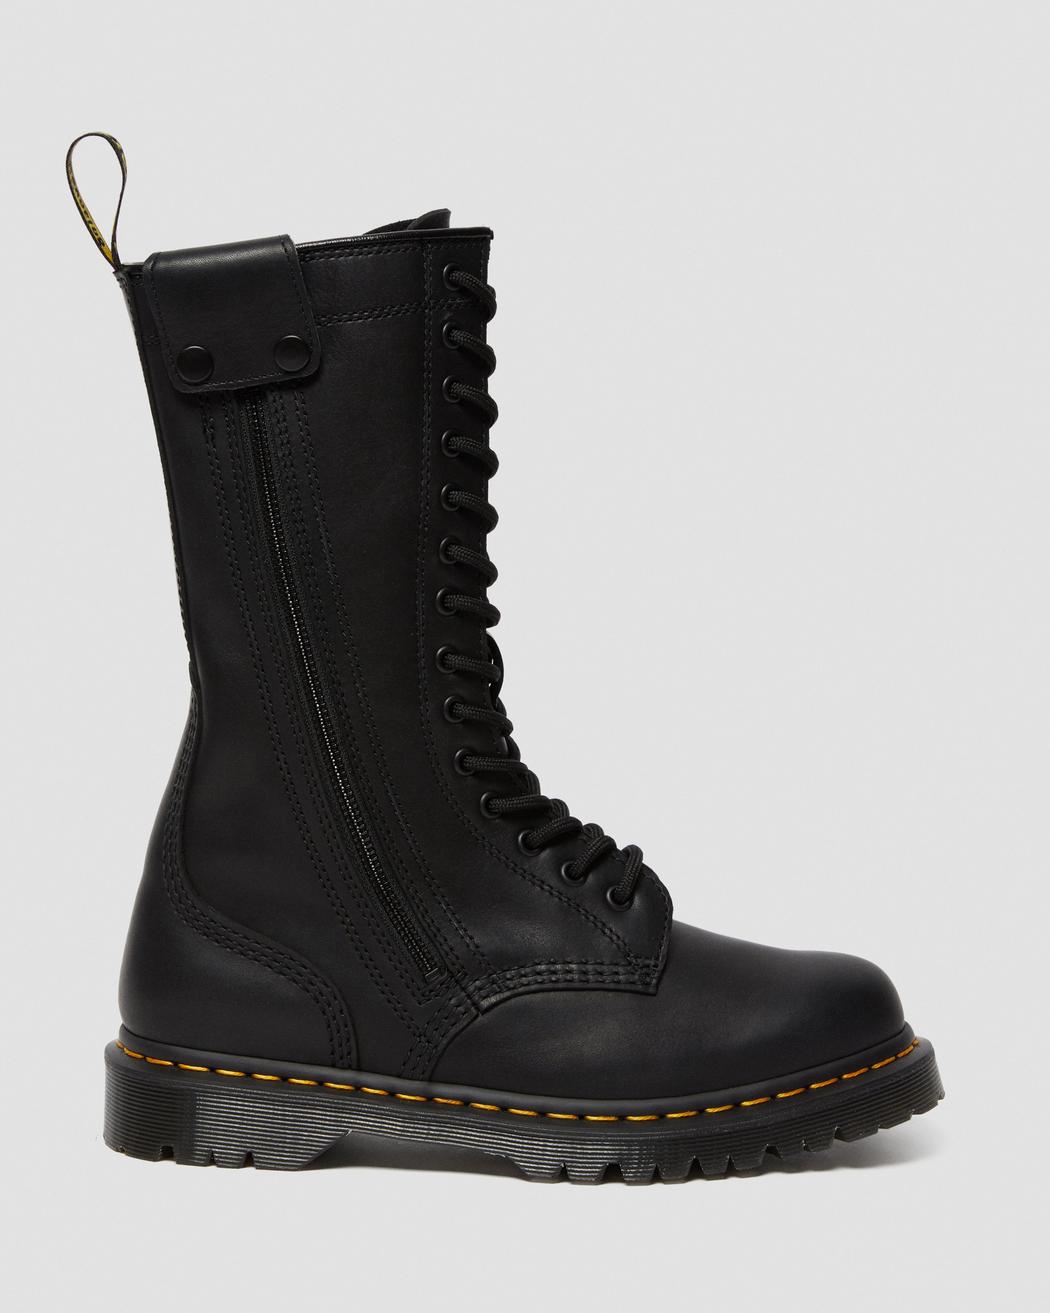 HANLEY HIGH LEATHER BOOTS | Dr. Martens